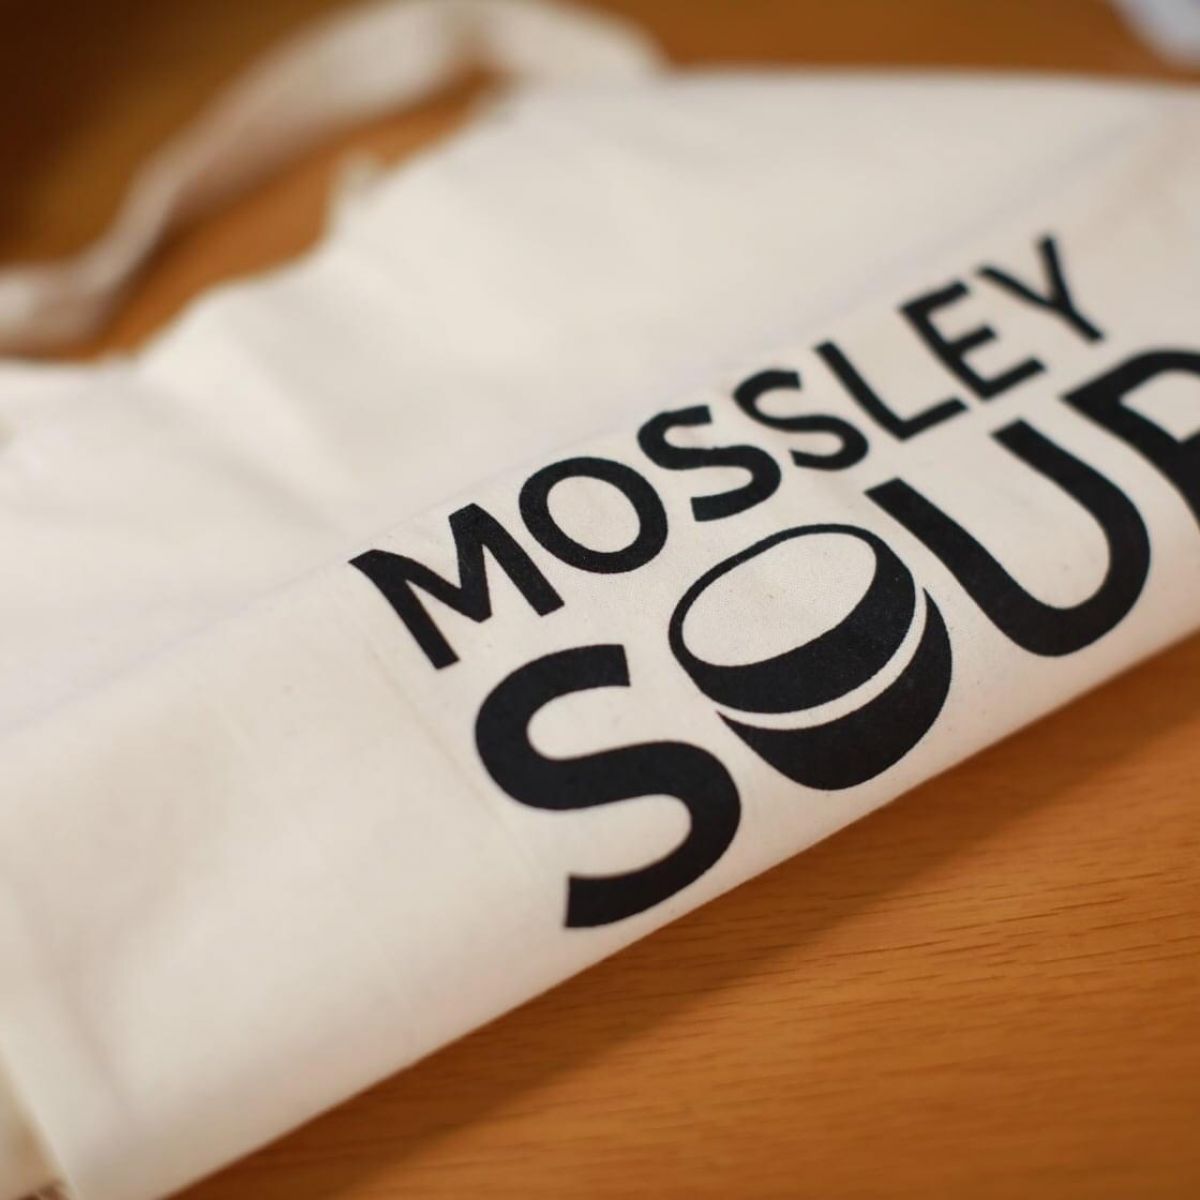 Mossley Soup  - 